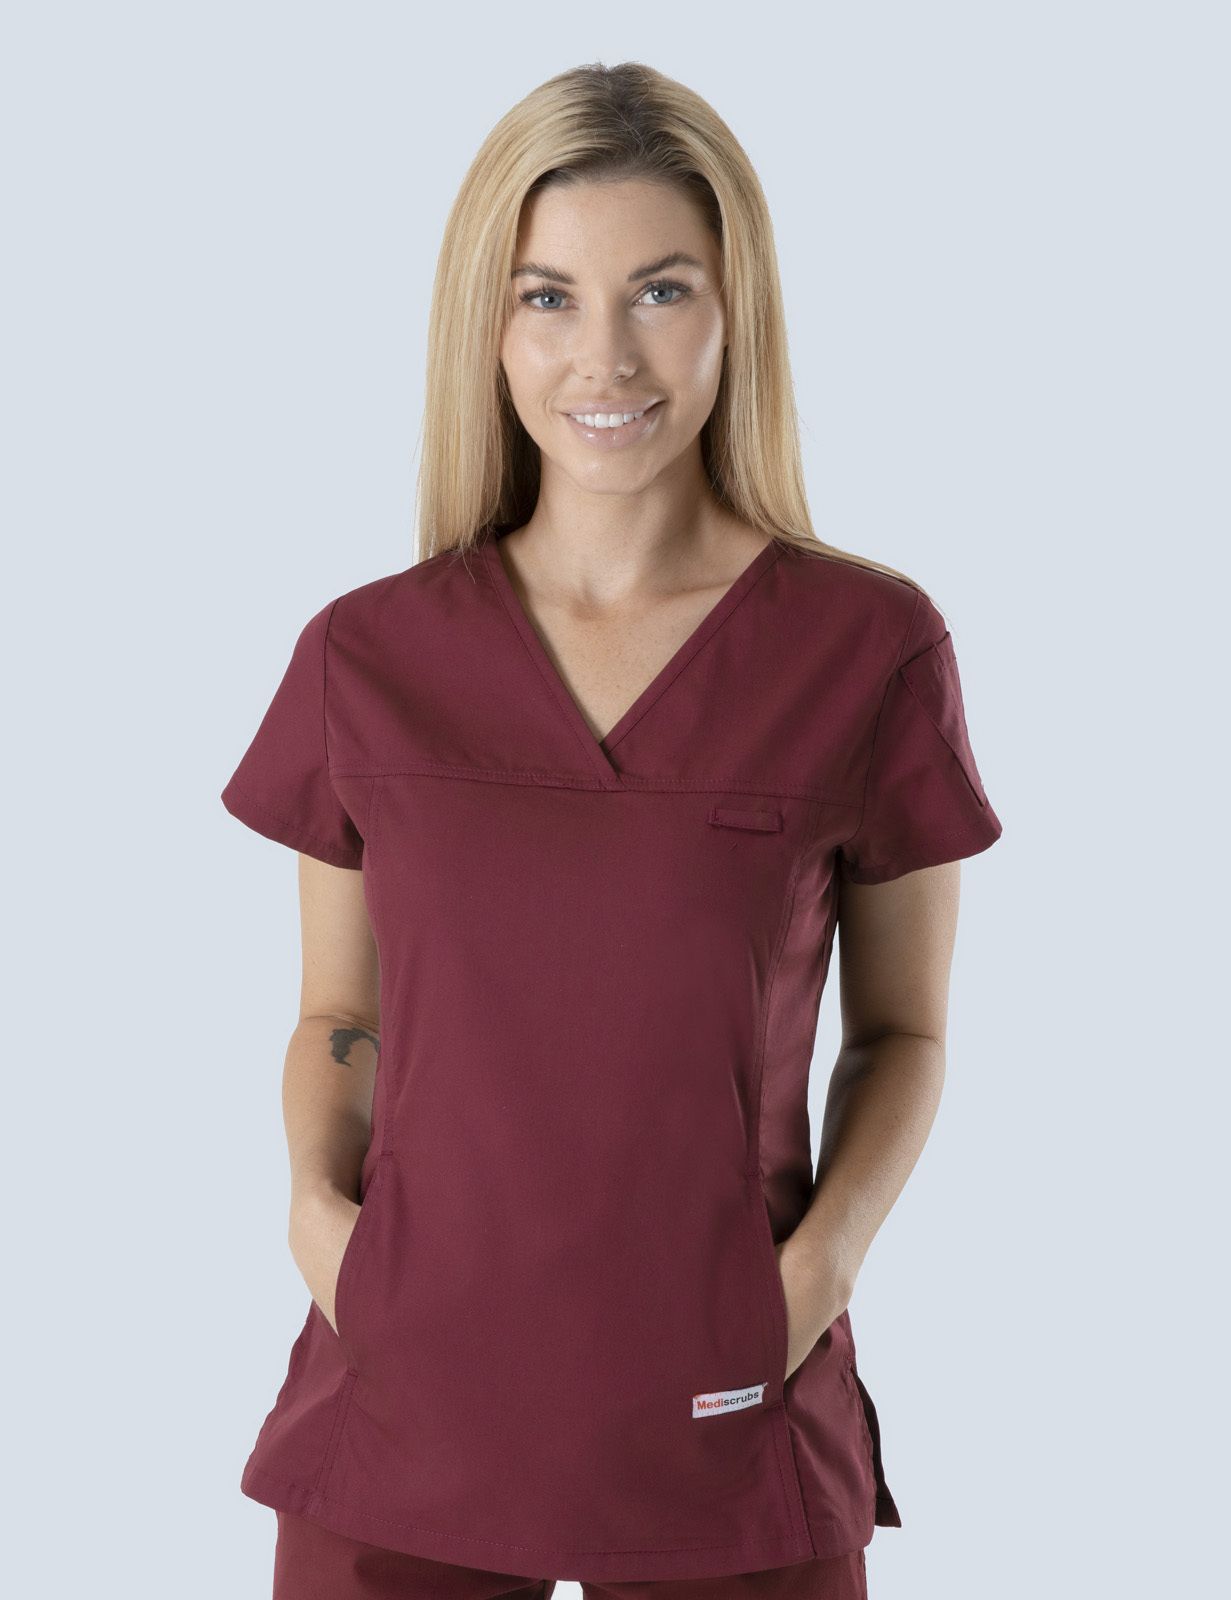 The Alfred Hospital - Pathology (Women's Fit Solid Scrub Top and Cargo Pants in Burgundy incl Logos)